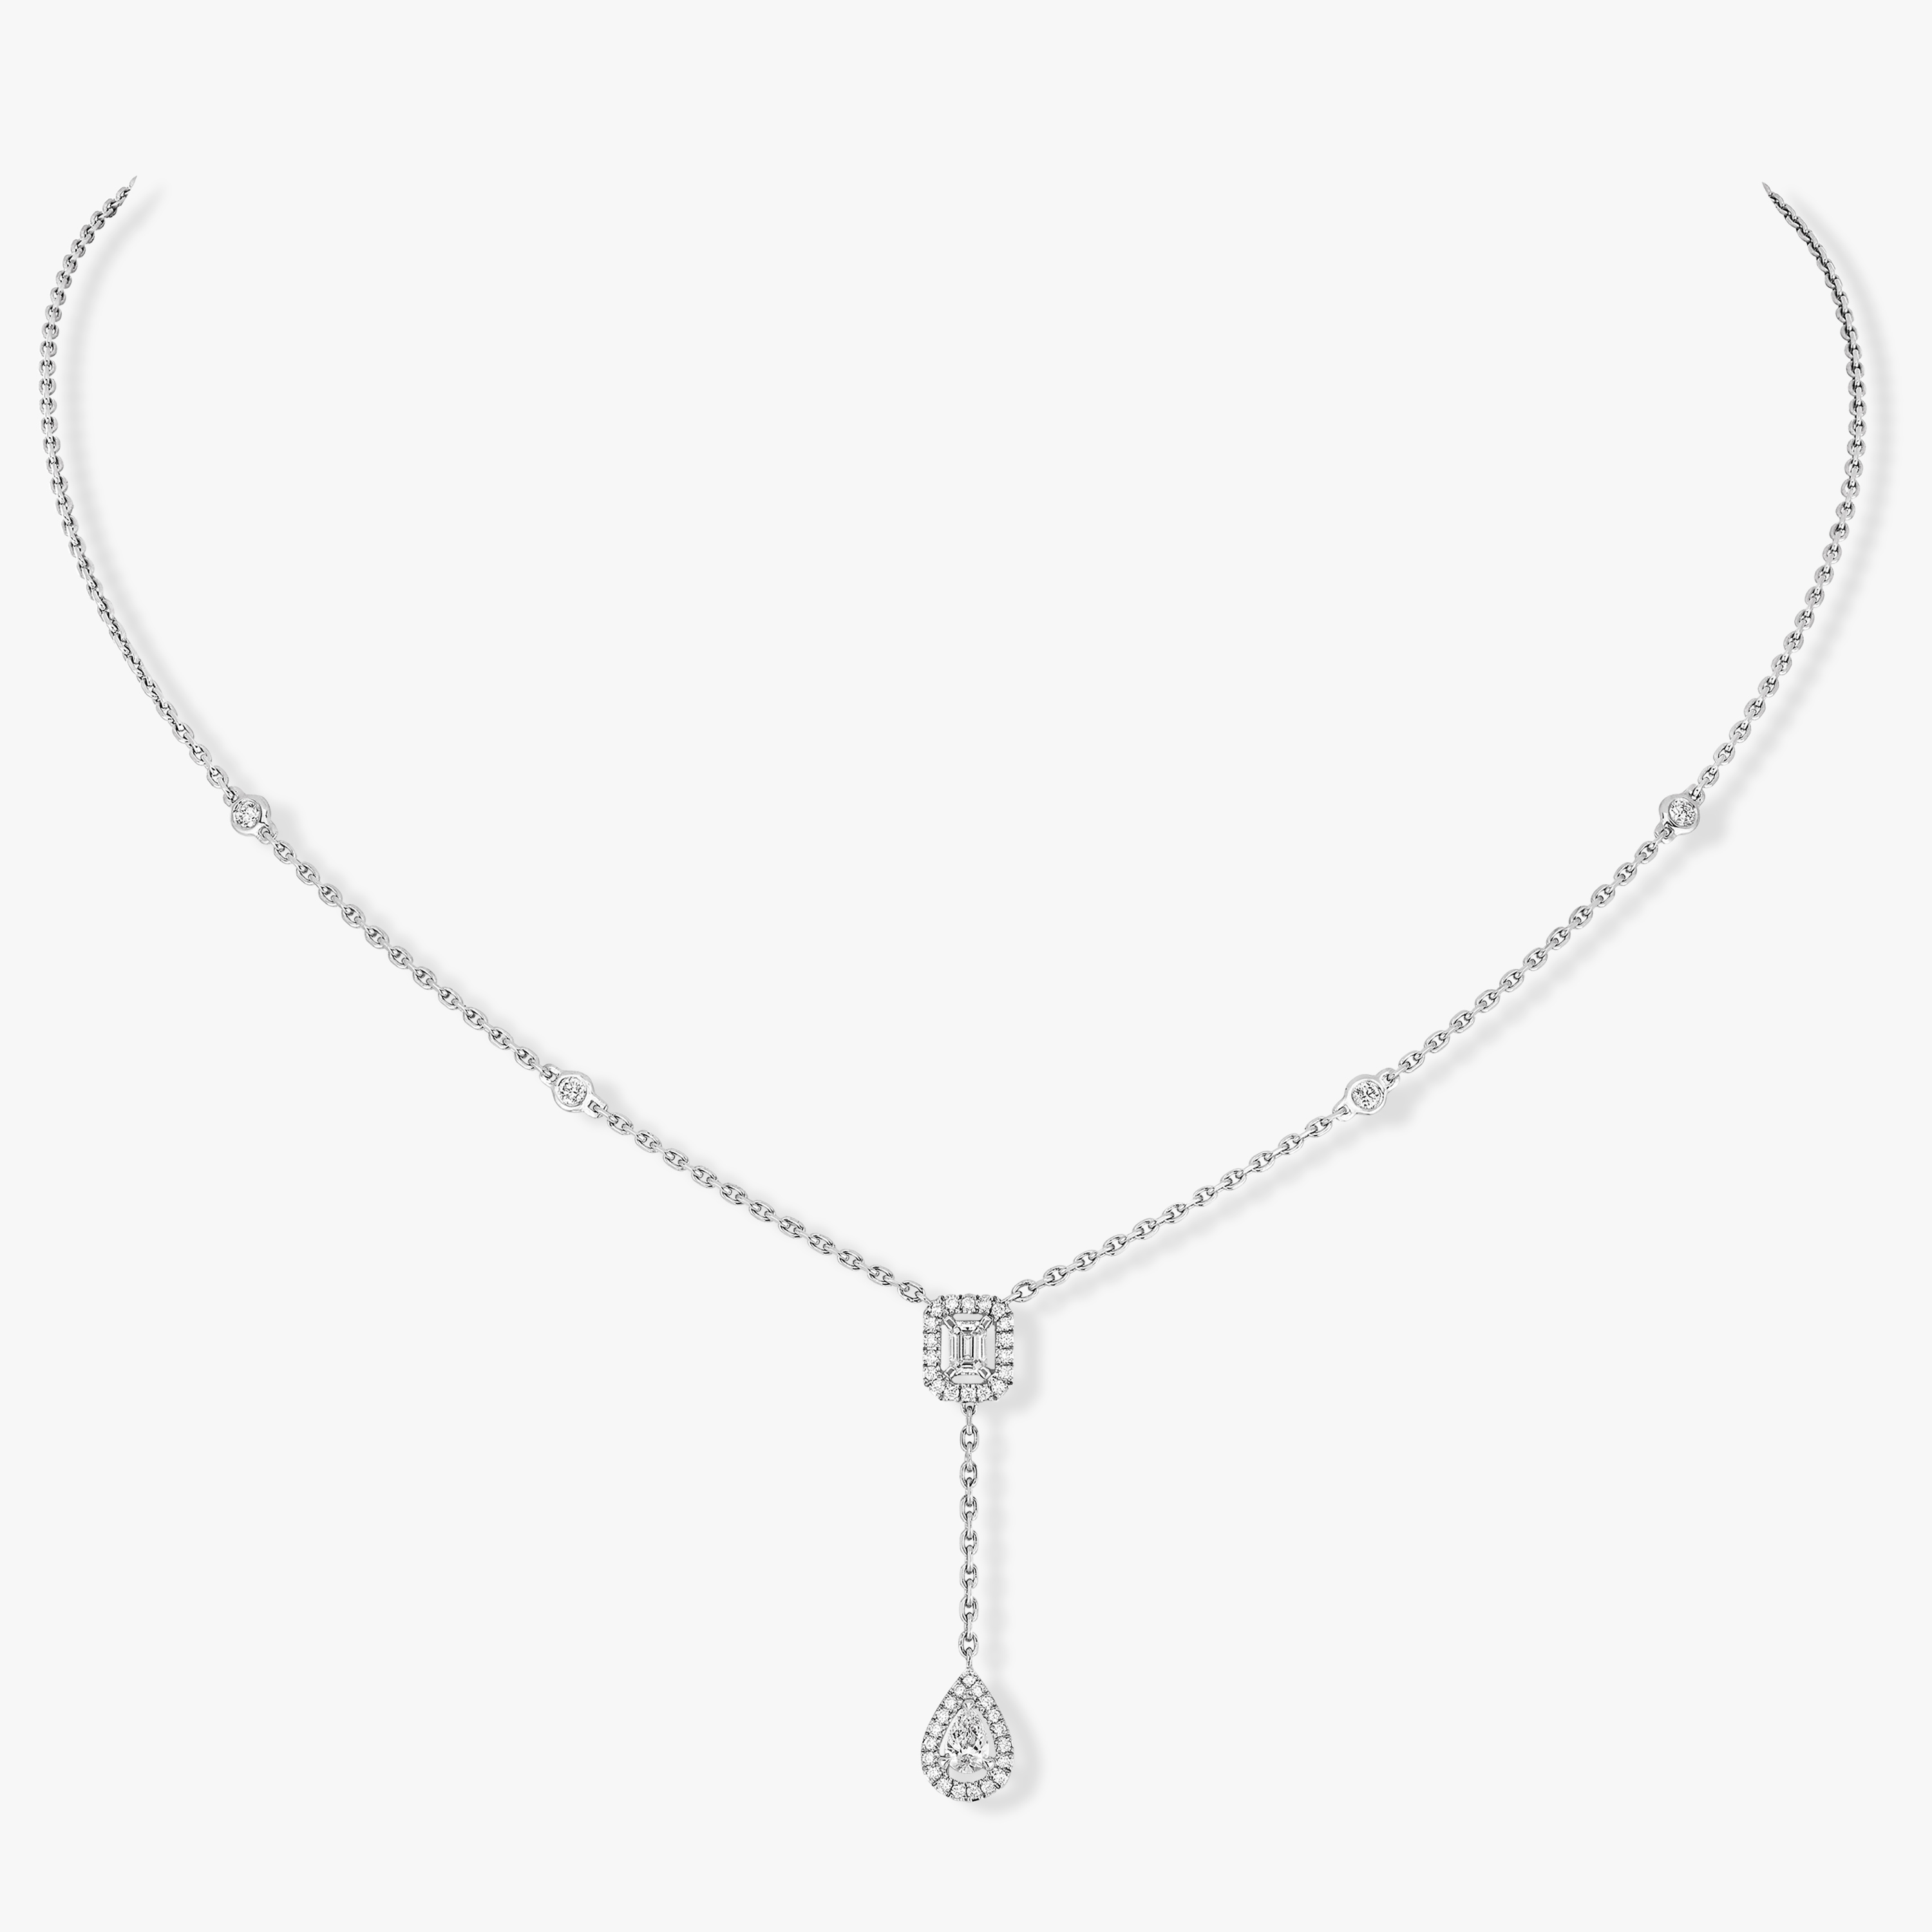 Collier Femme Or Blanc Diamant My Twin Cravate 0,10ct x2 06693-WG